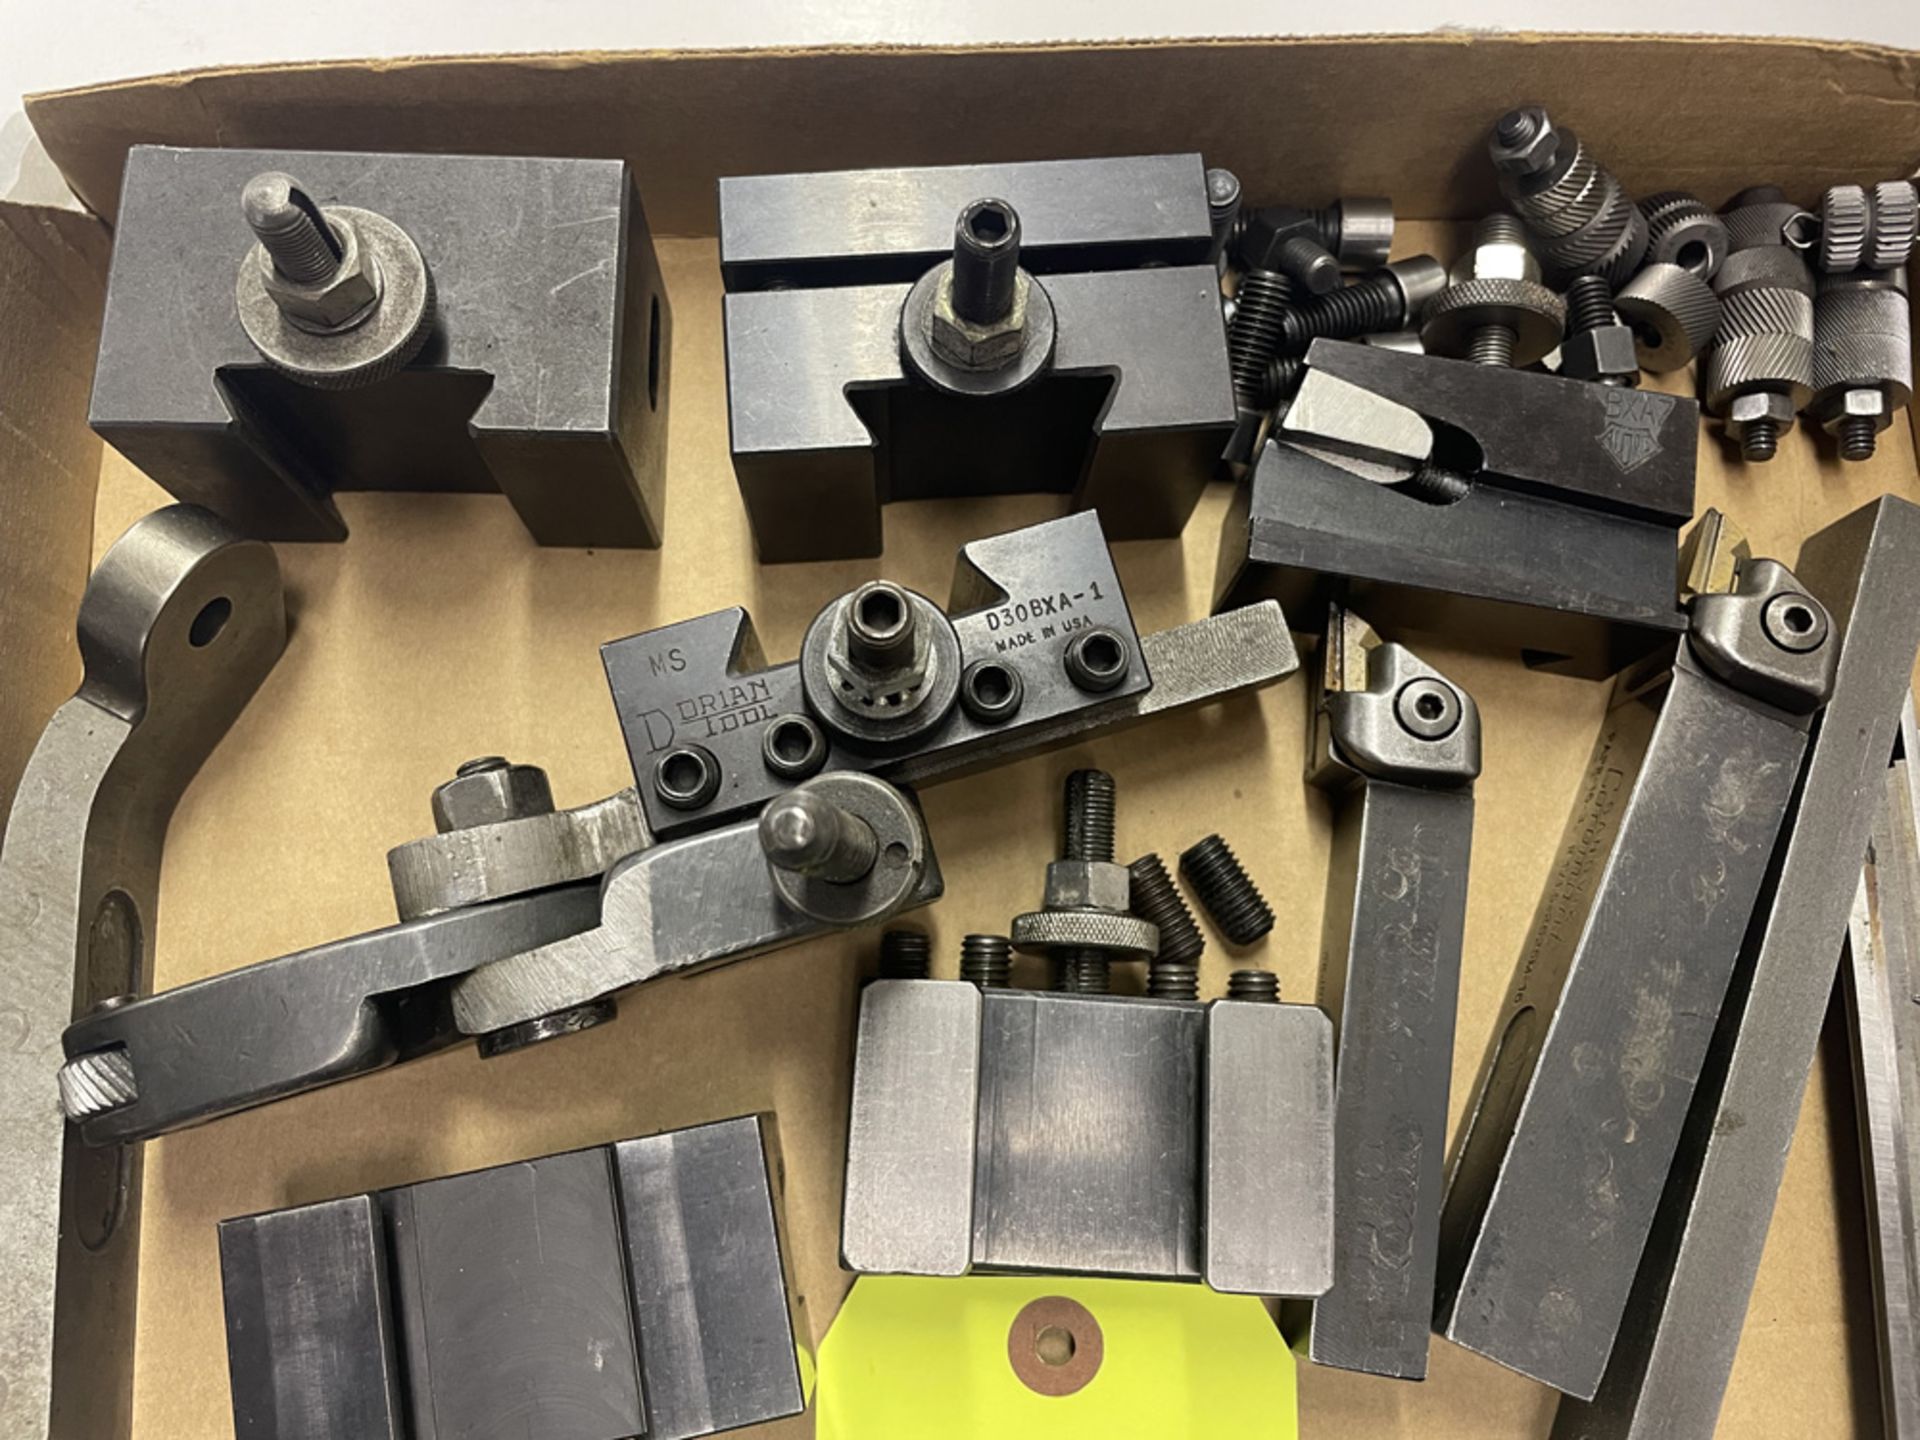 Lot with Dorian & Aloris Engine lathe toolholders, cutters & Misc. Lathe Tools - Image 2 of 2